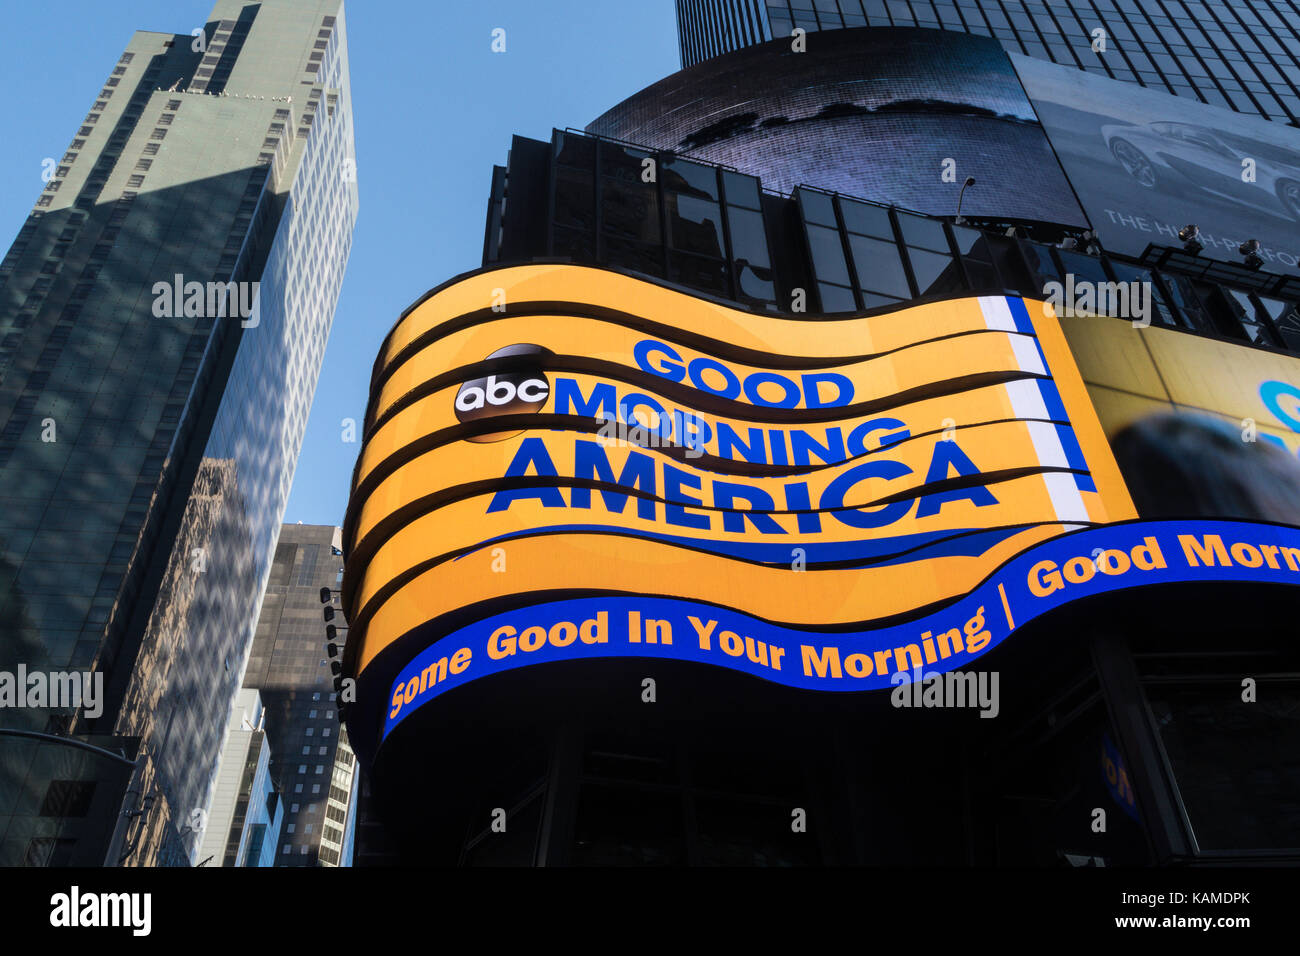 Wrap Around Moving Billboard at ABC TV Network News Studios in Times Square, NYC, USA Stock Photo